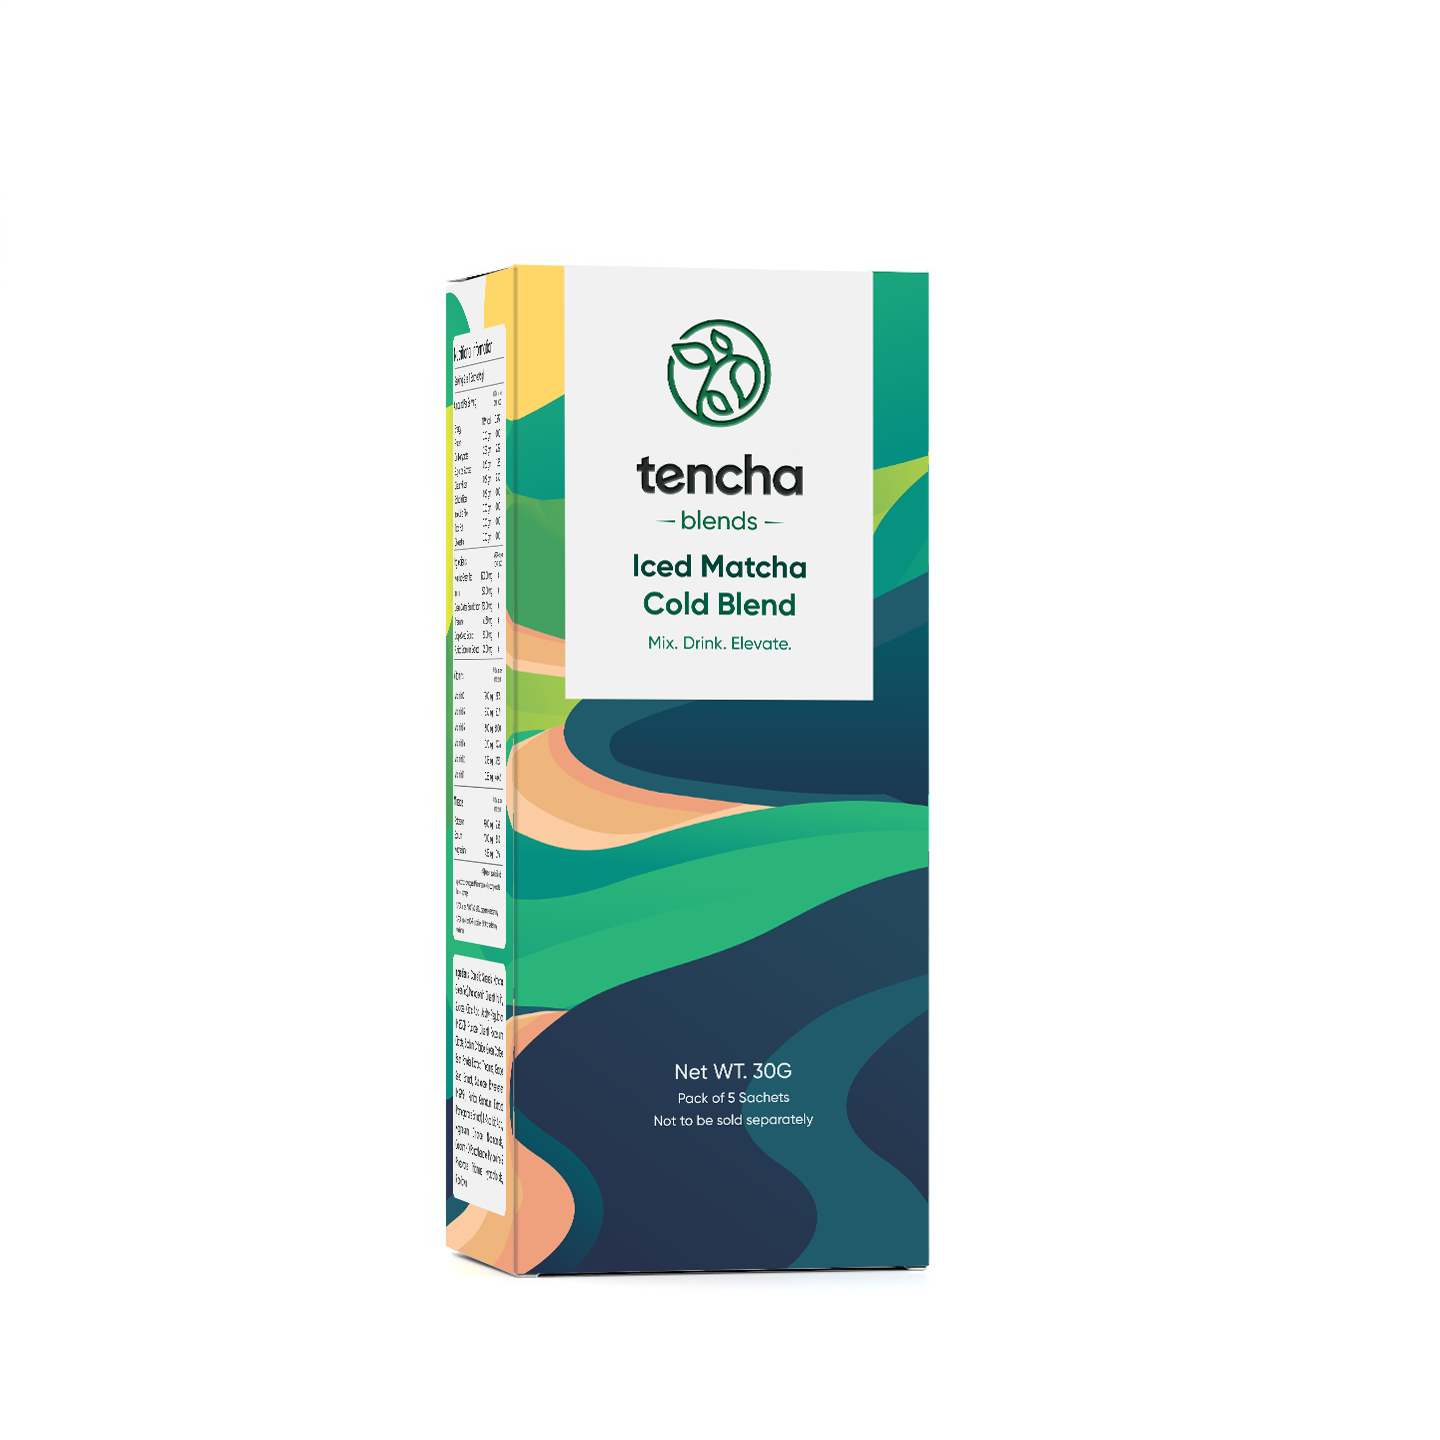 Iced Matcha Cold Blend, Pack of 5 Sachets